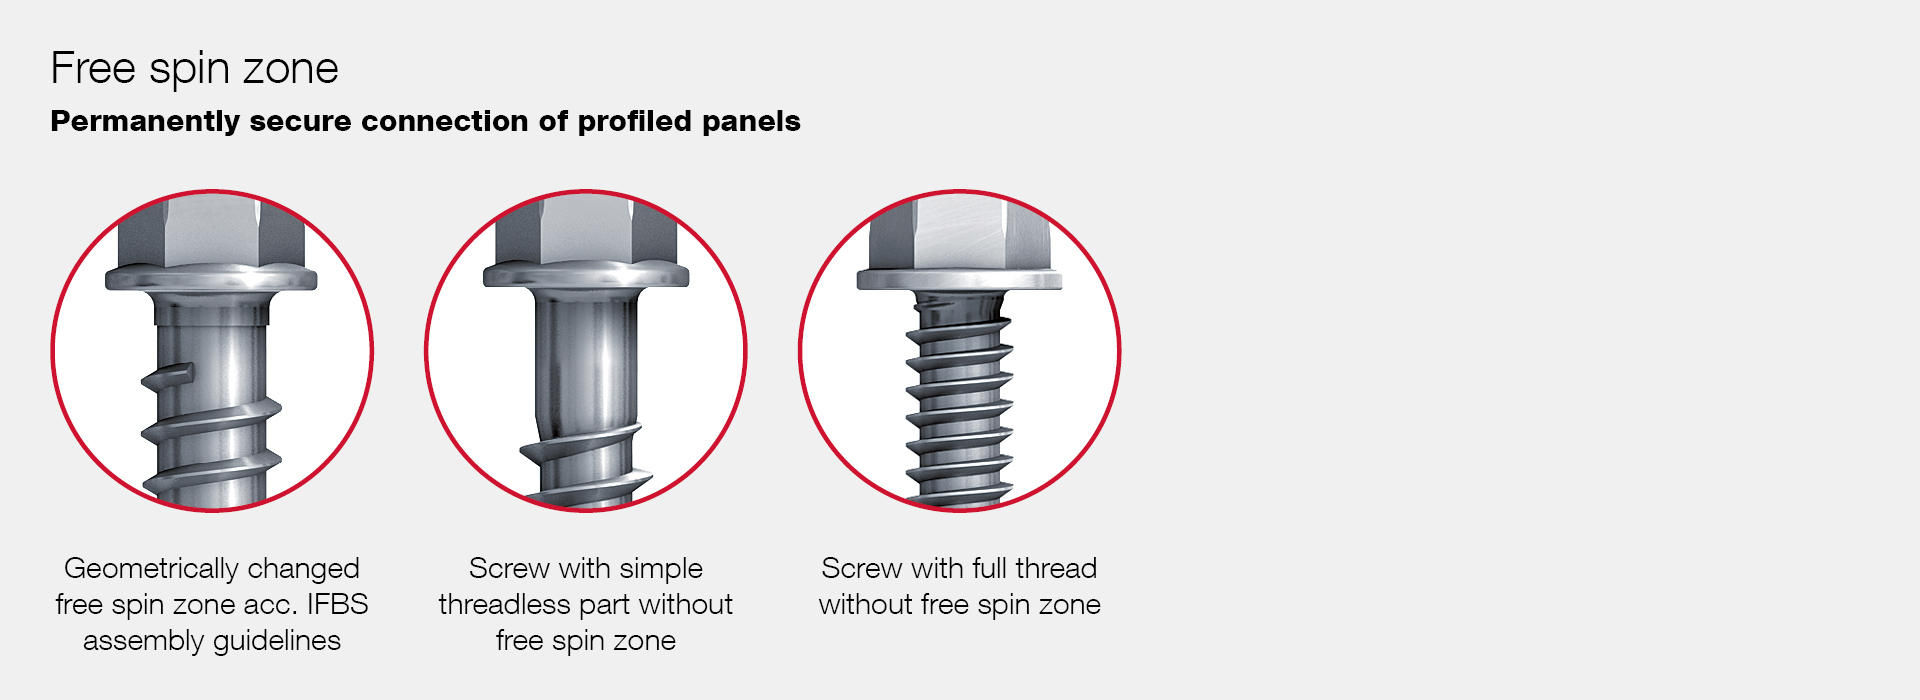 Special features of self-drilling screws – The free spin zone